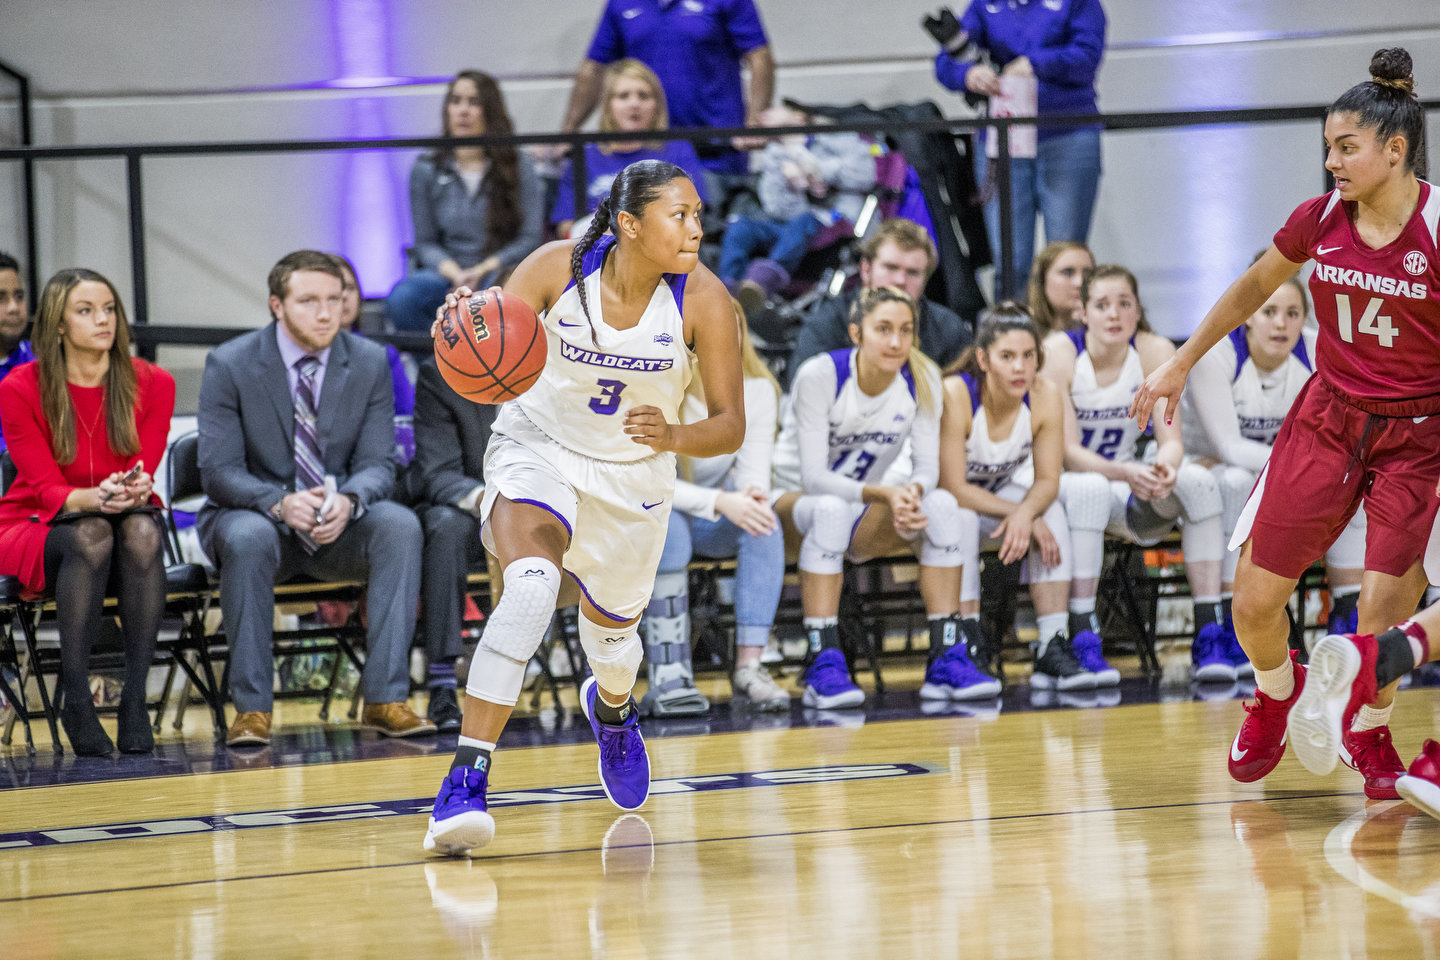 Dominique Golightly (Kiowa) Leads Abilene Christian with 19 points in Win over Northwestern State